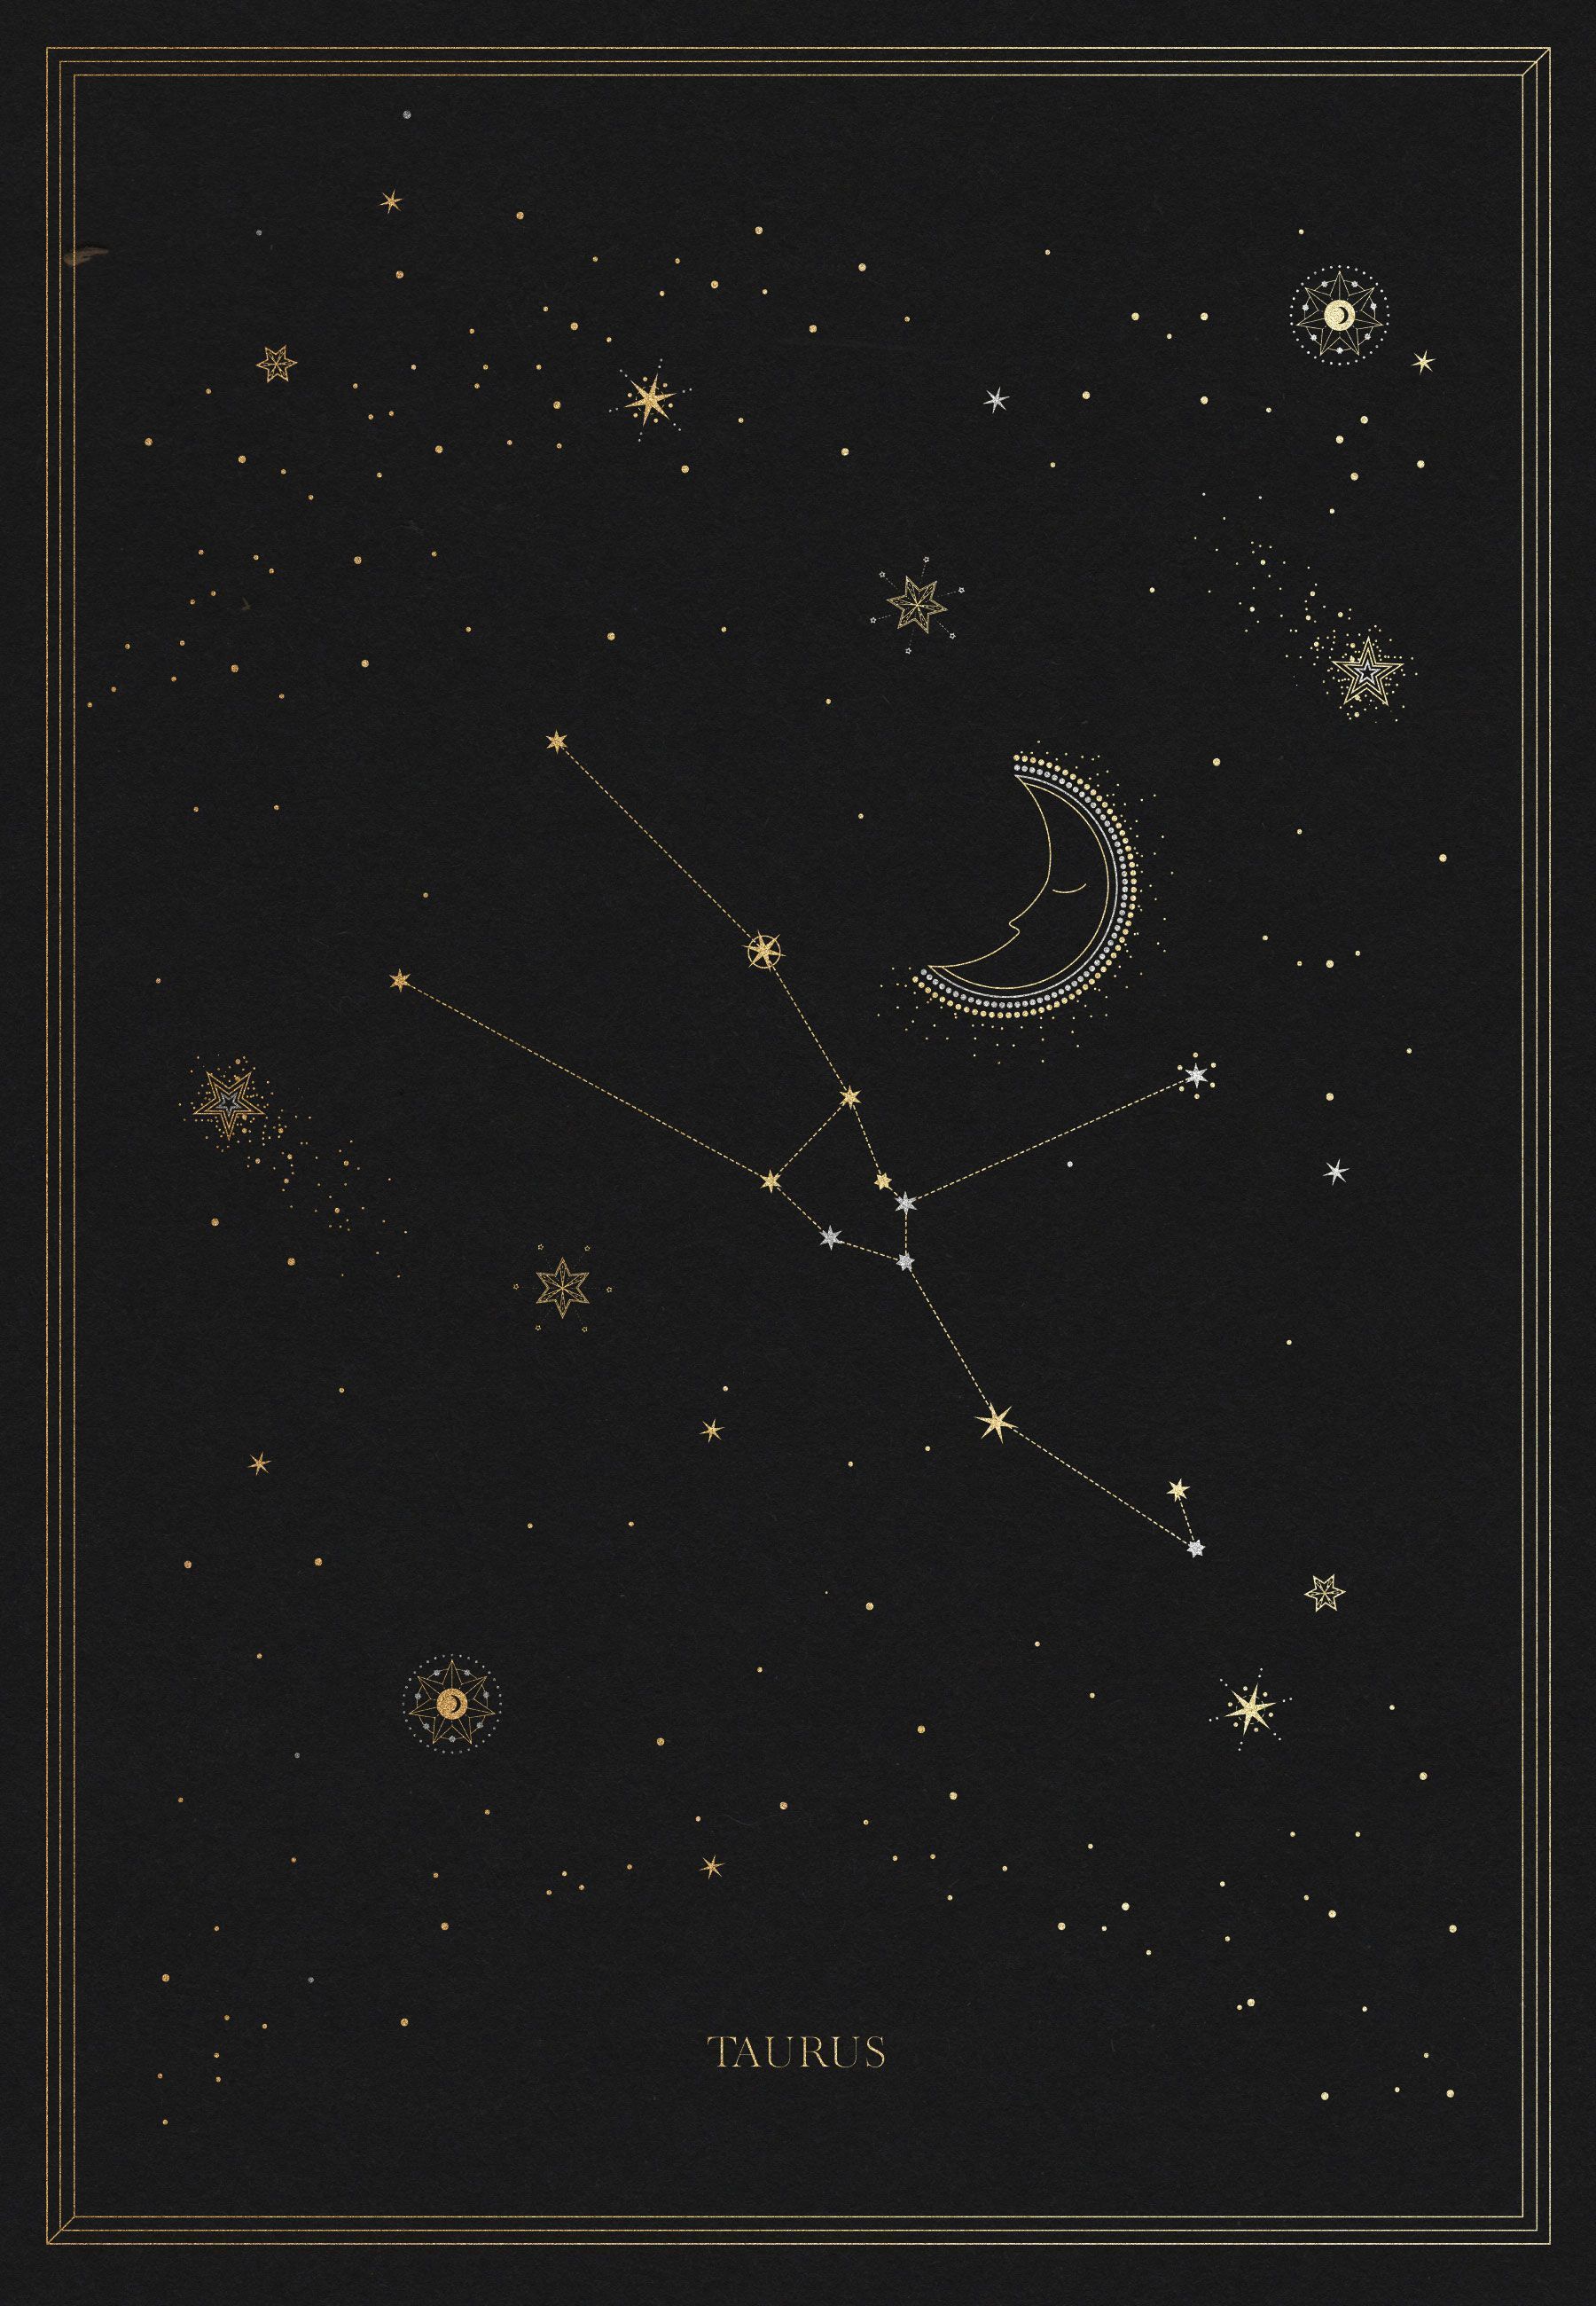 A black poster with gold stars and the constellation Taurus. - Constellation, Taurus